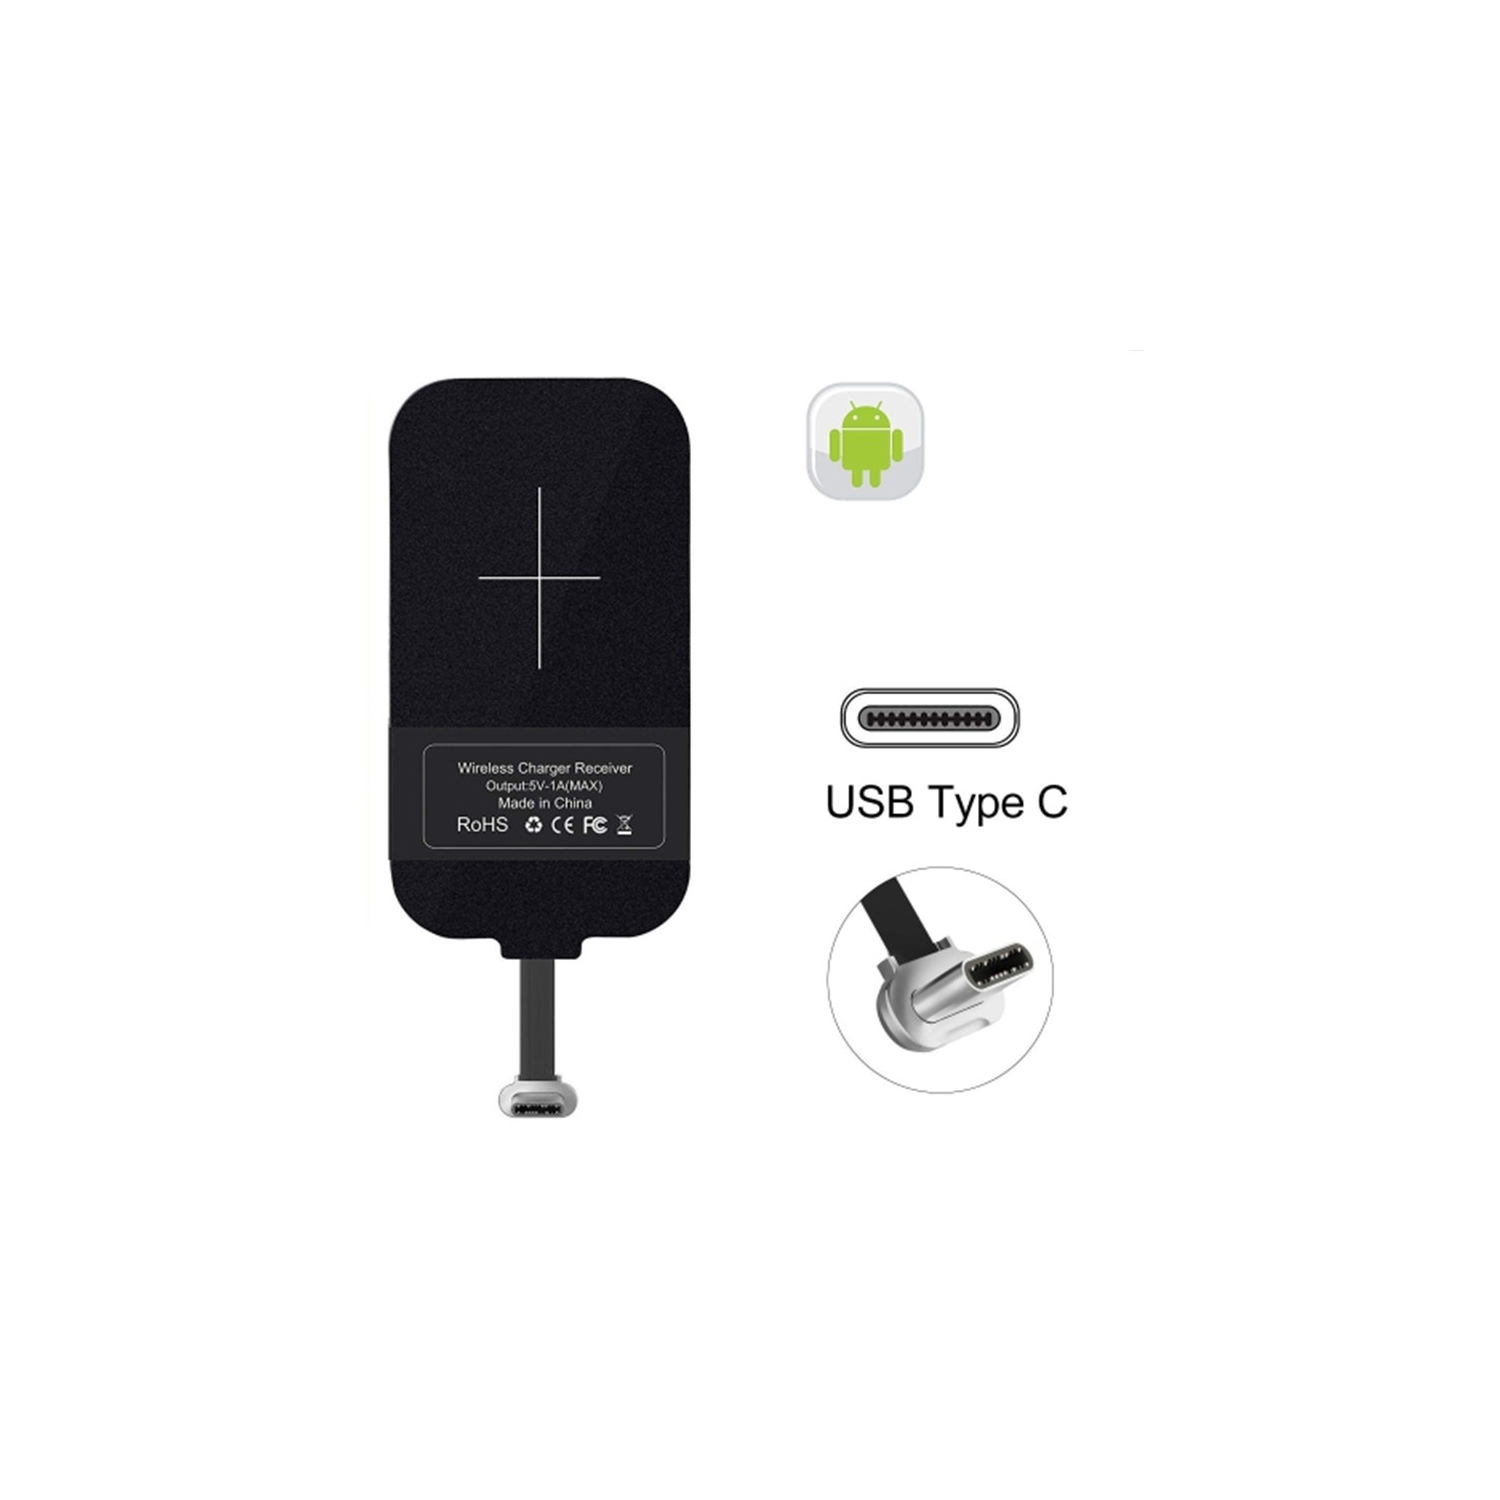 Qi Wireless Charger Charging Receiver Pad (Type C Port) for Samsung / LG / Sony / Google / Motorola / Android Phones